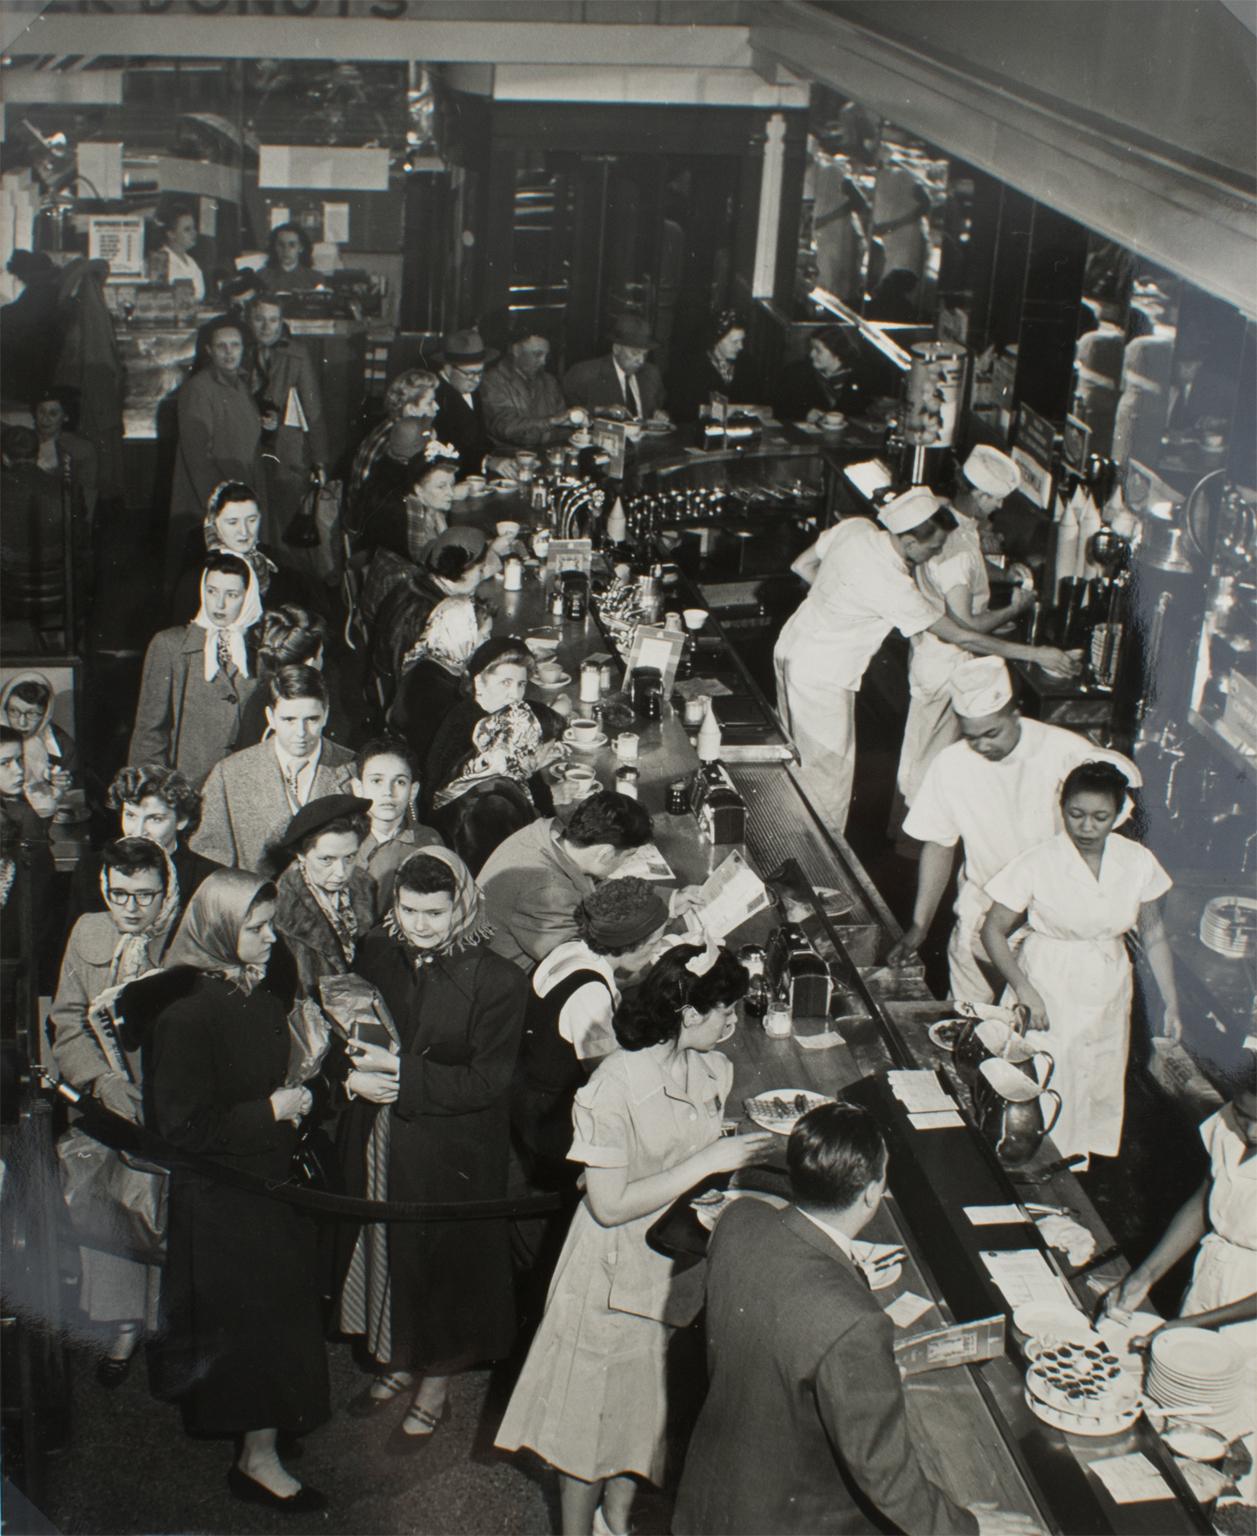 An original silver gelatin black and white photograph by Graphic House Inc, New York, and Atlantic Press, Paris. A busy diner in New York, circa 1950.
Features:
Original silver gelatin print photography unframed.
Press Atlantic Press,